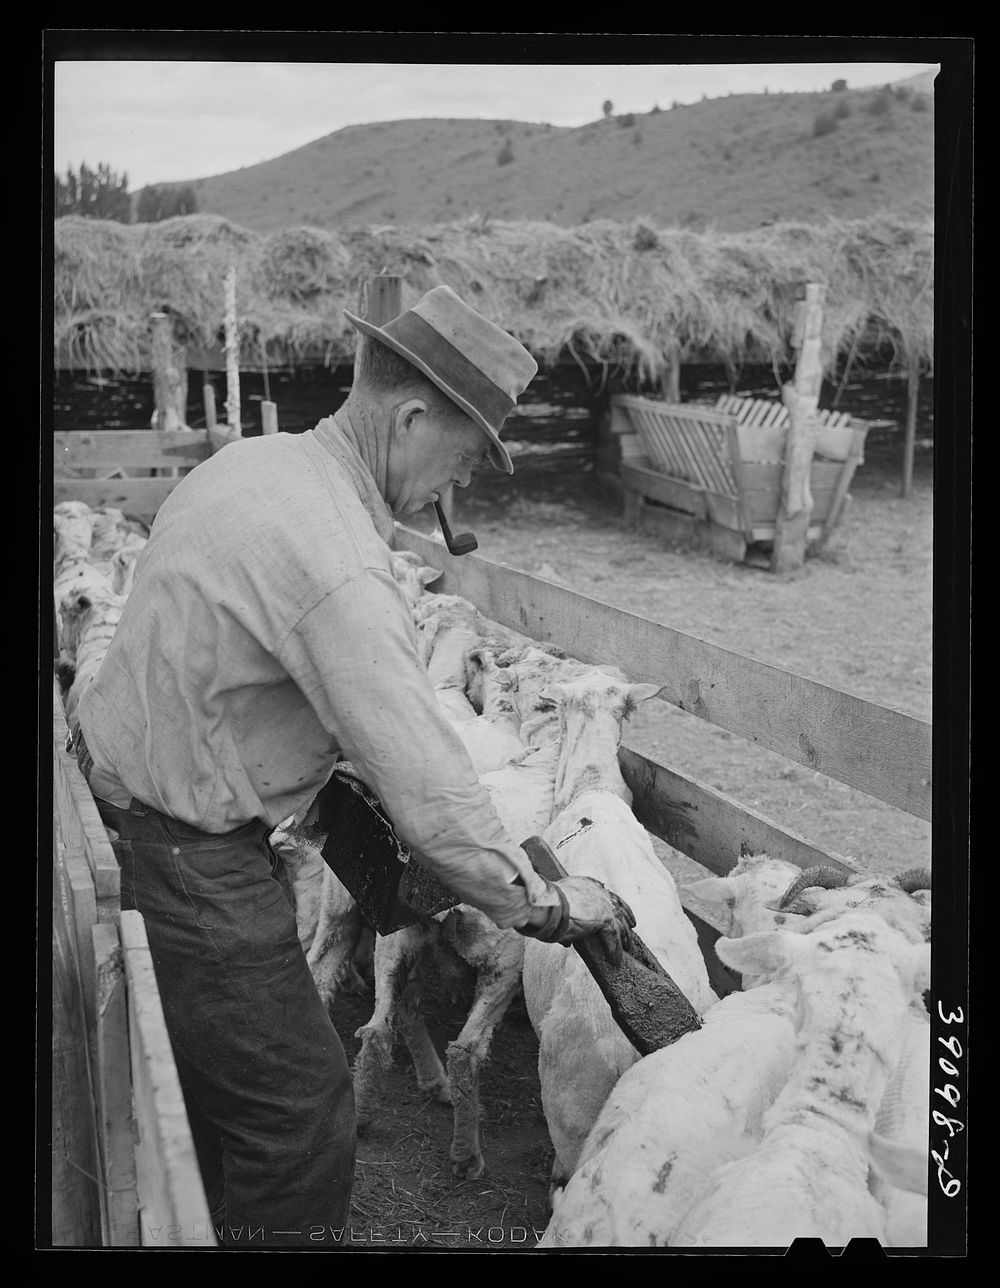 Painting brands on shorn sheep. Ranch in Malheur County, Oregon by Russell Lee